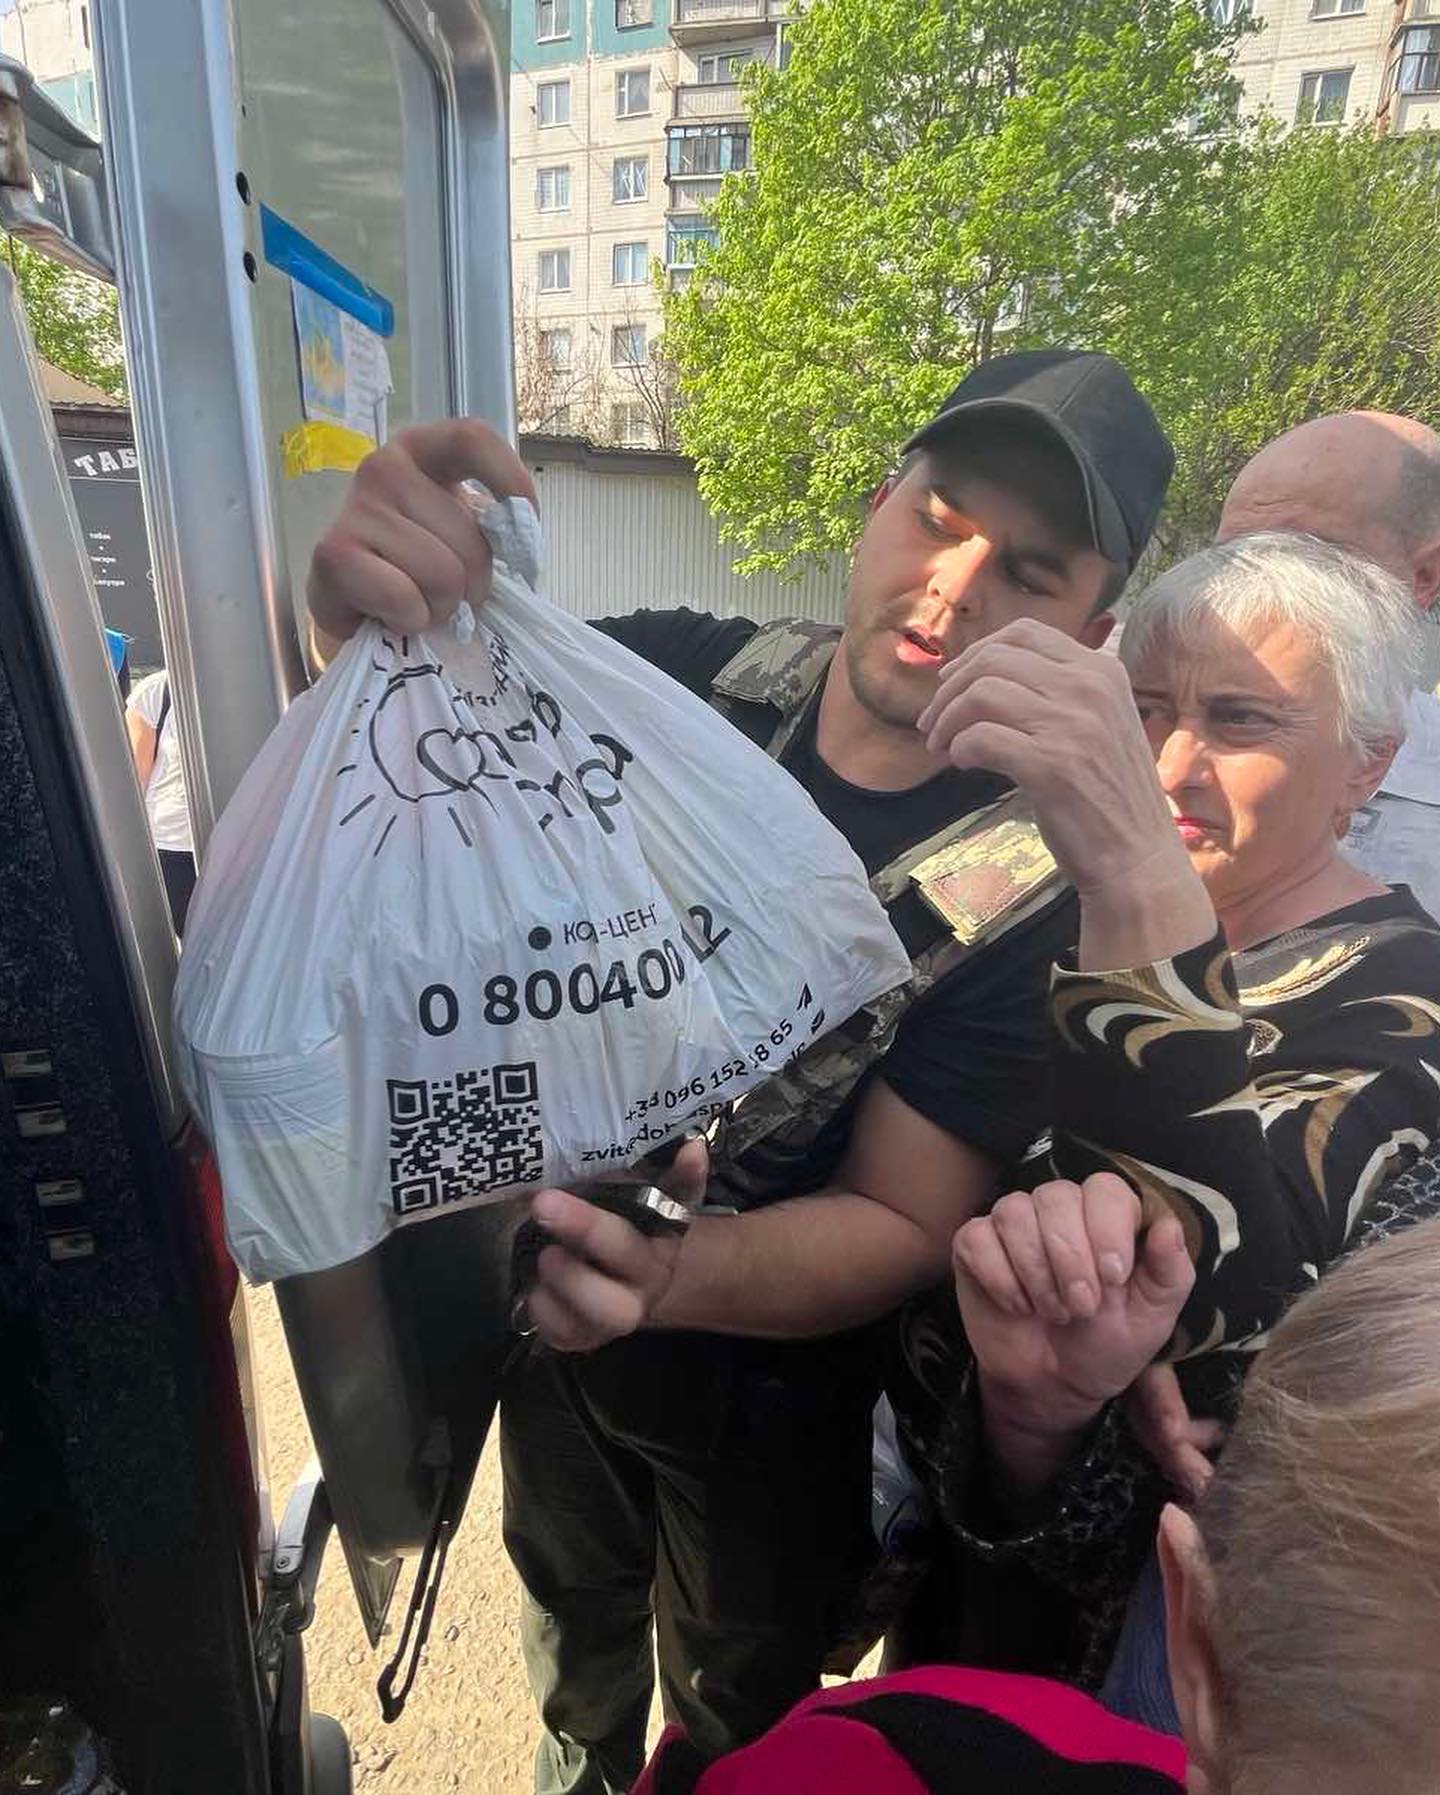 A young man hands a plastic bag labeled "Hope for Ukraine aid" and a QR code to an elderly woman by a bus, as other passengers look on.